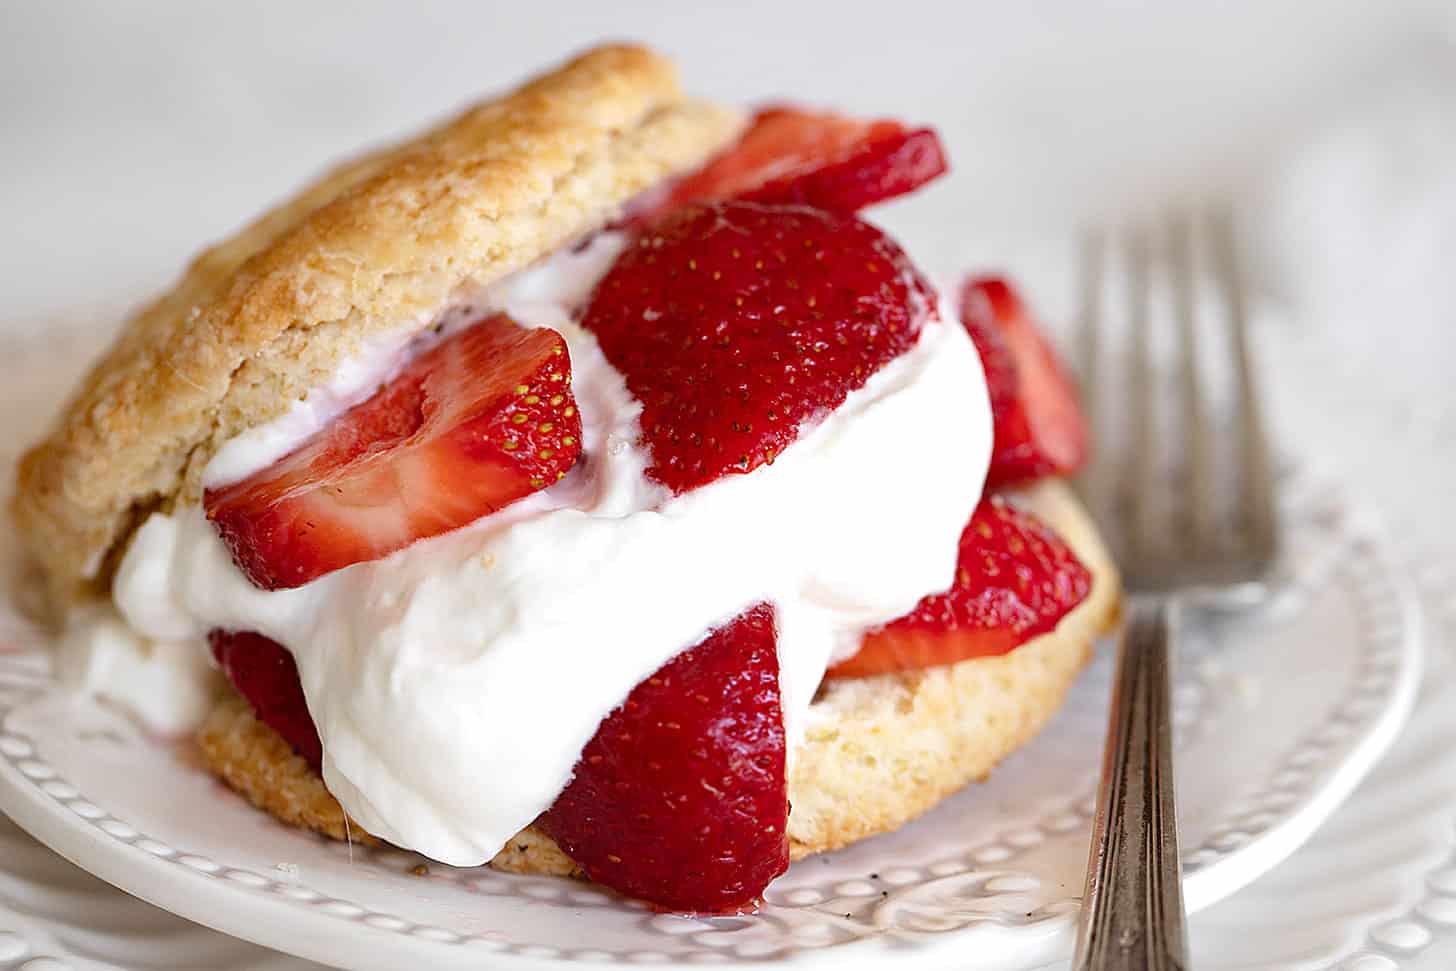 old-fashioned strawberry shortcake on plate